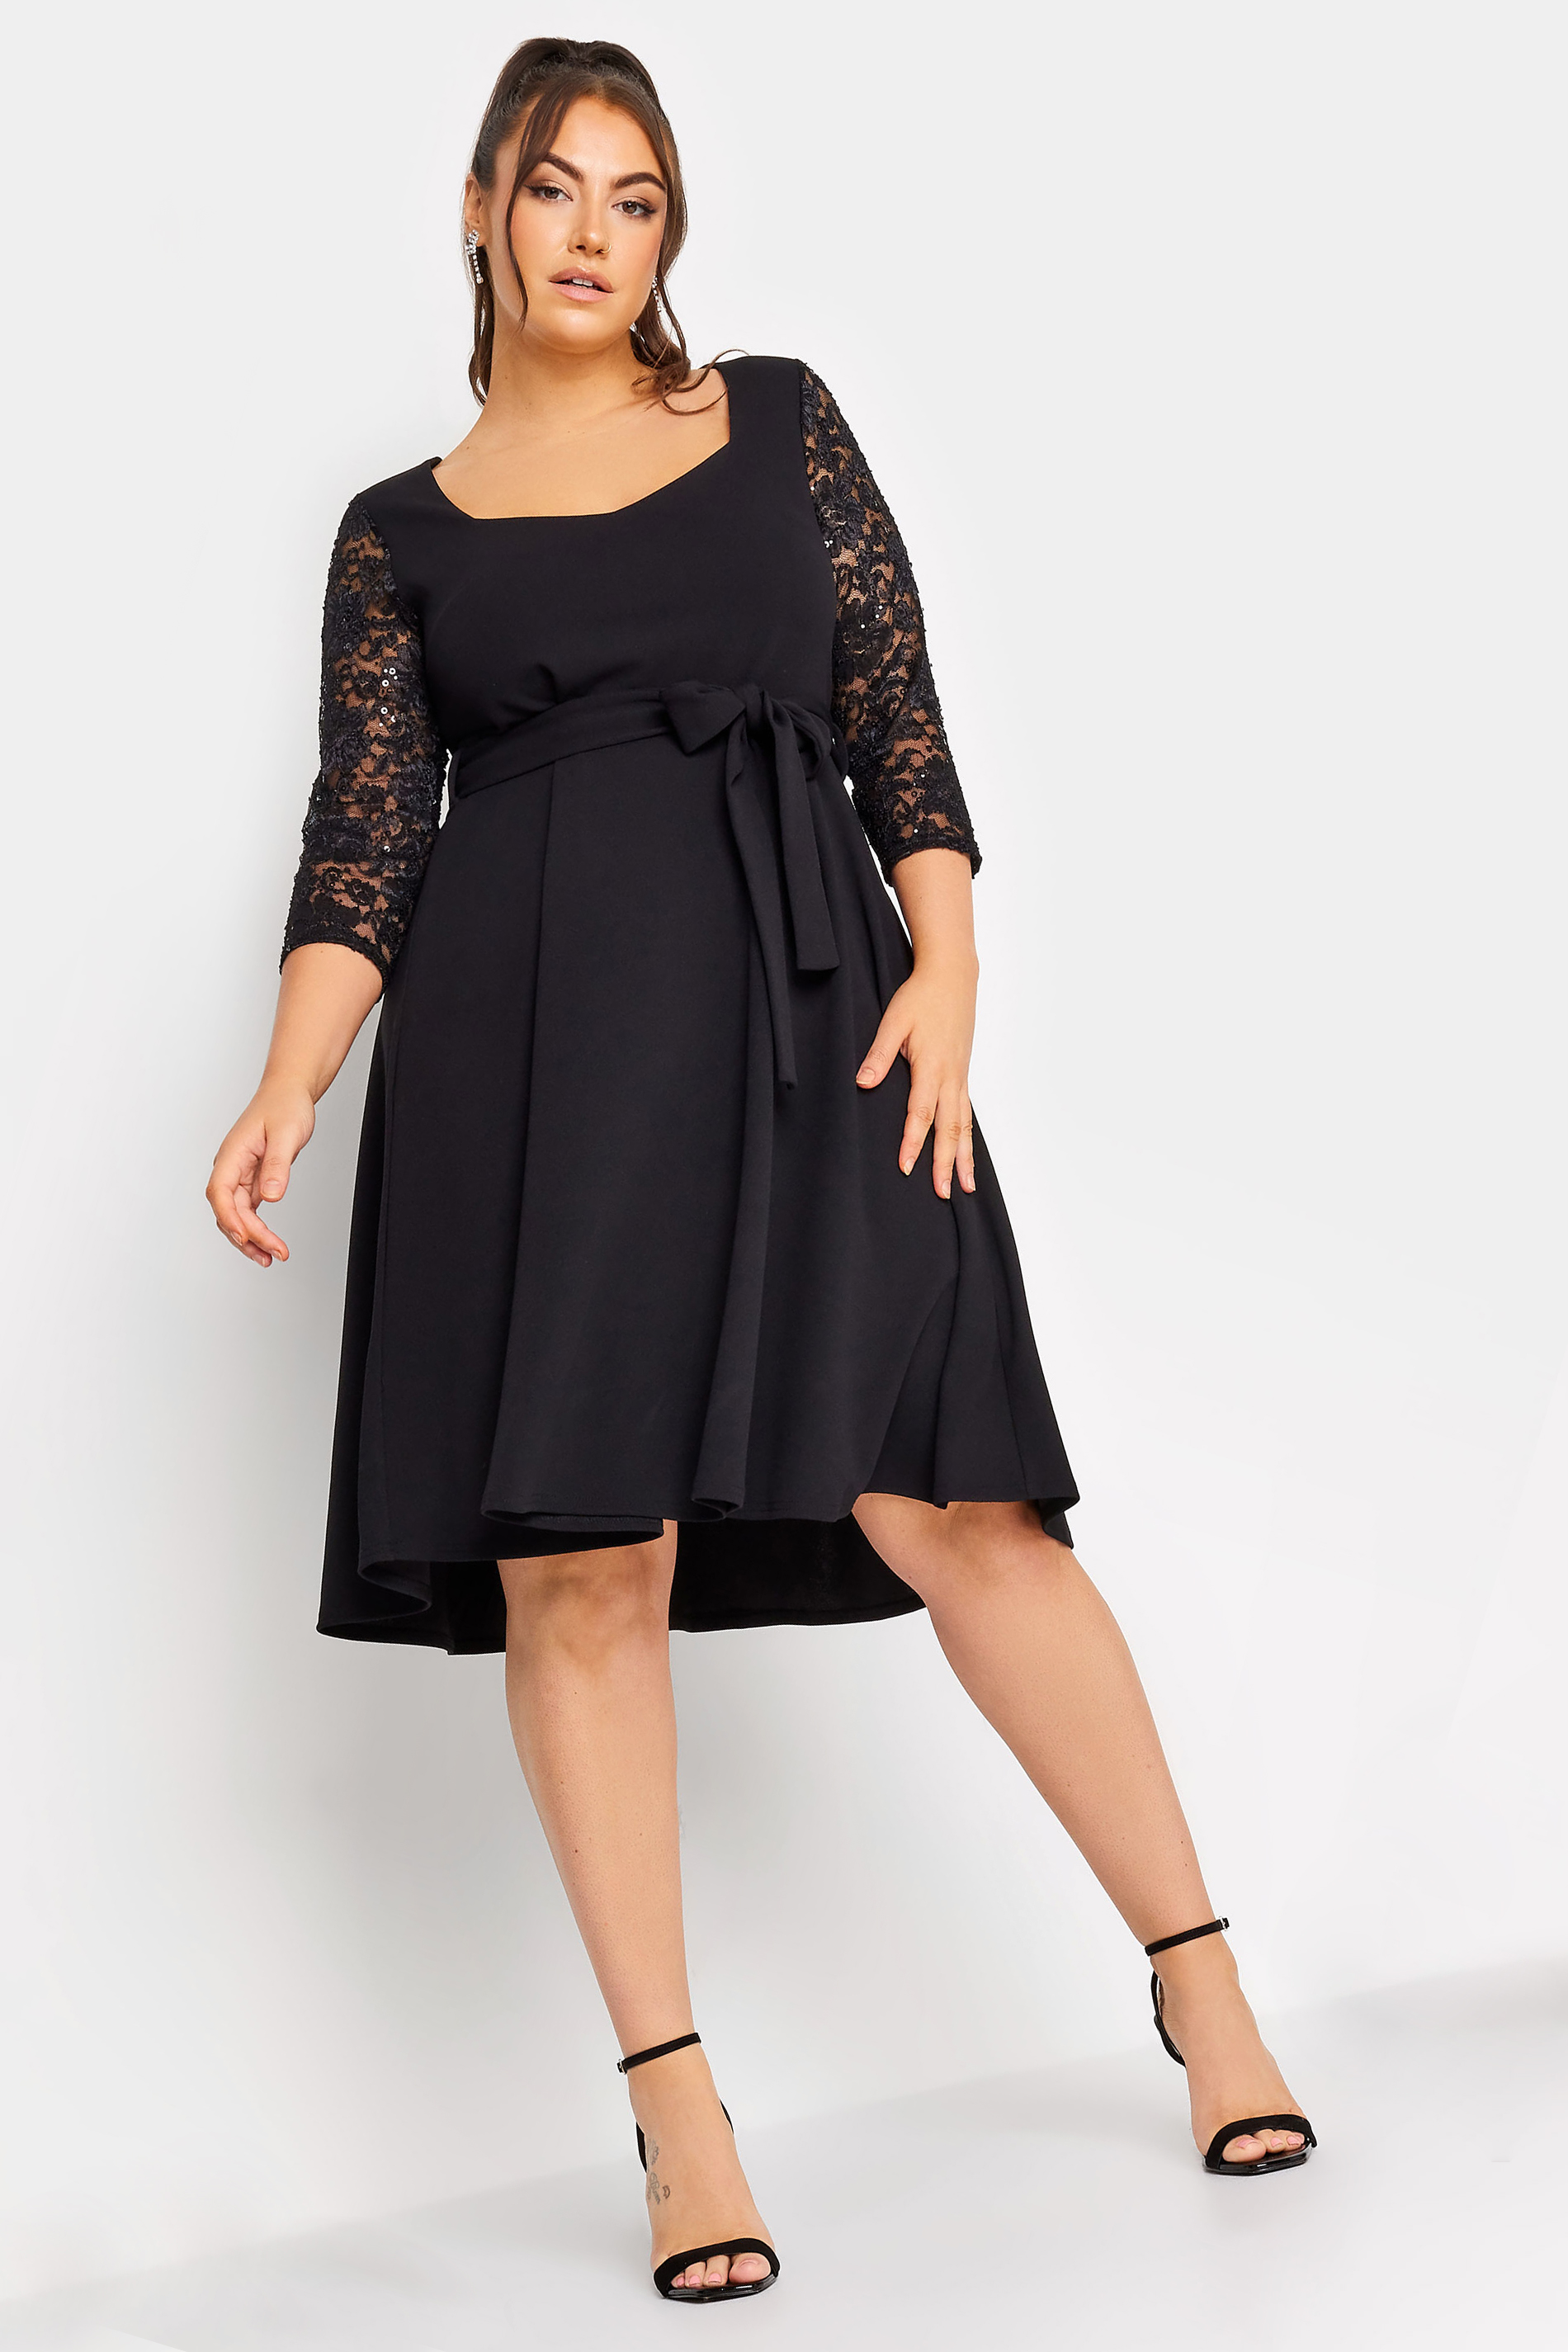 YOURS LONDON Plus Size Black Sequin Detail Lace Sleeve Skater Dress | Yours Clothing 1